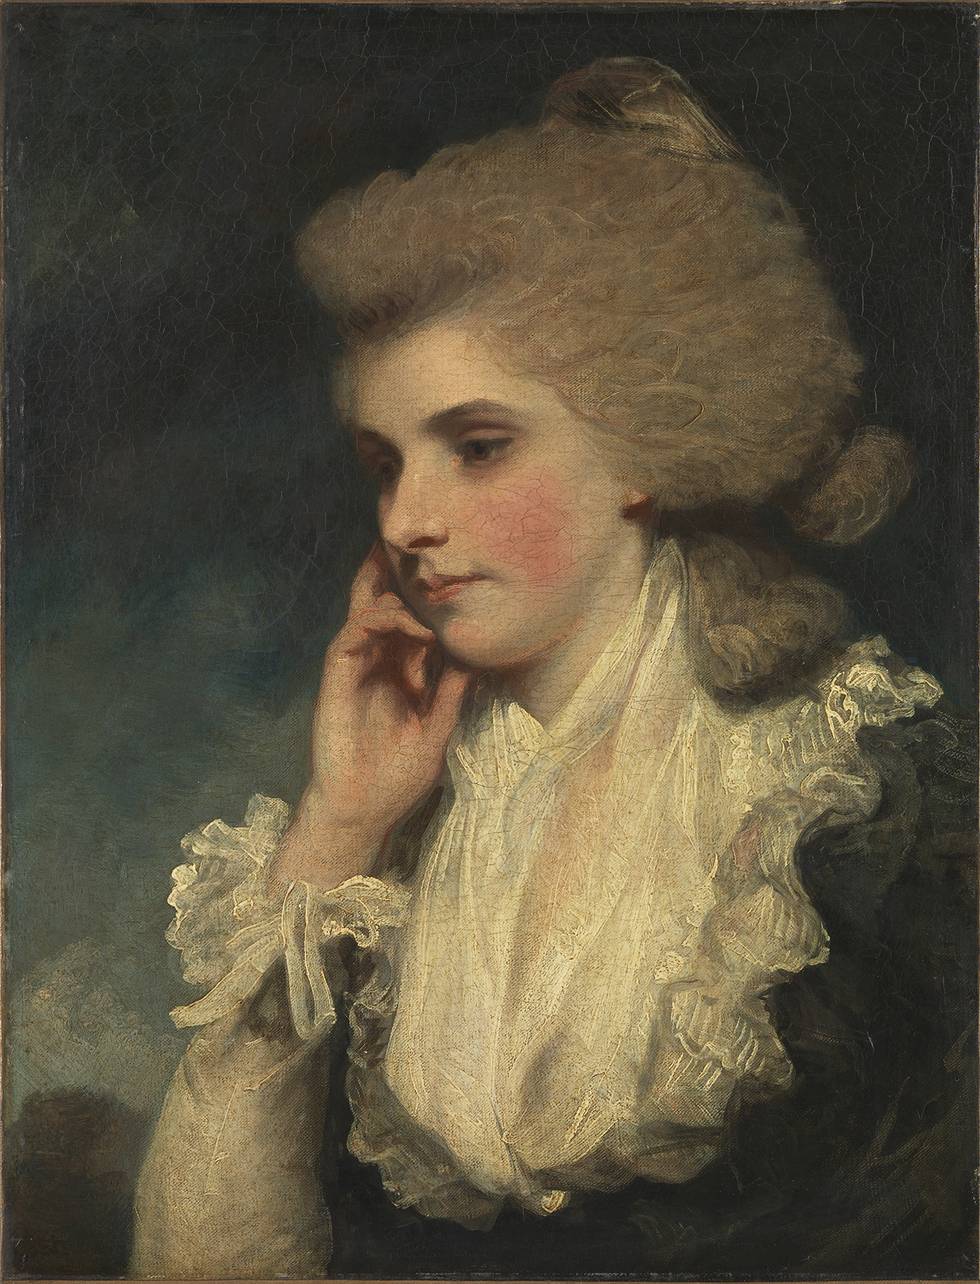 A painting of a woman wearing a wig